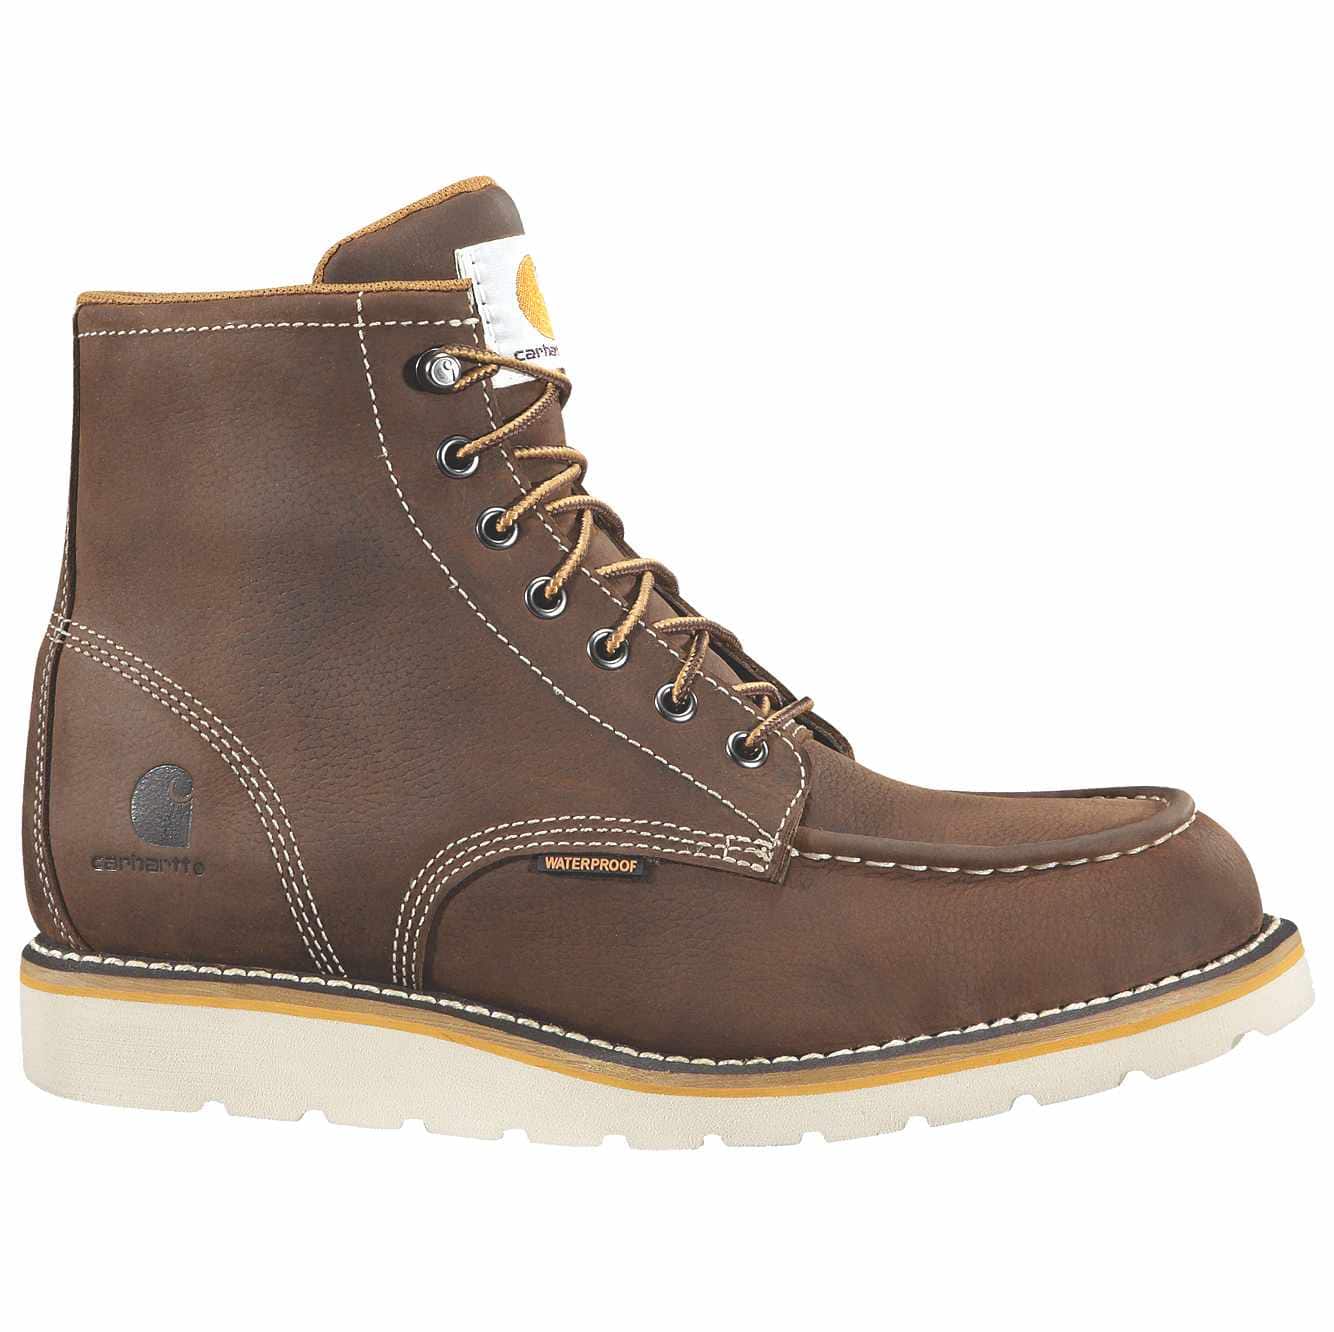 CMW6295 6 inch Steel Toe Wedge outsole Boot (Brown)